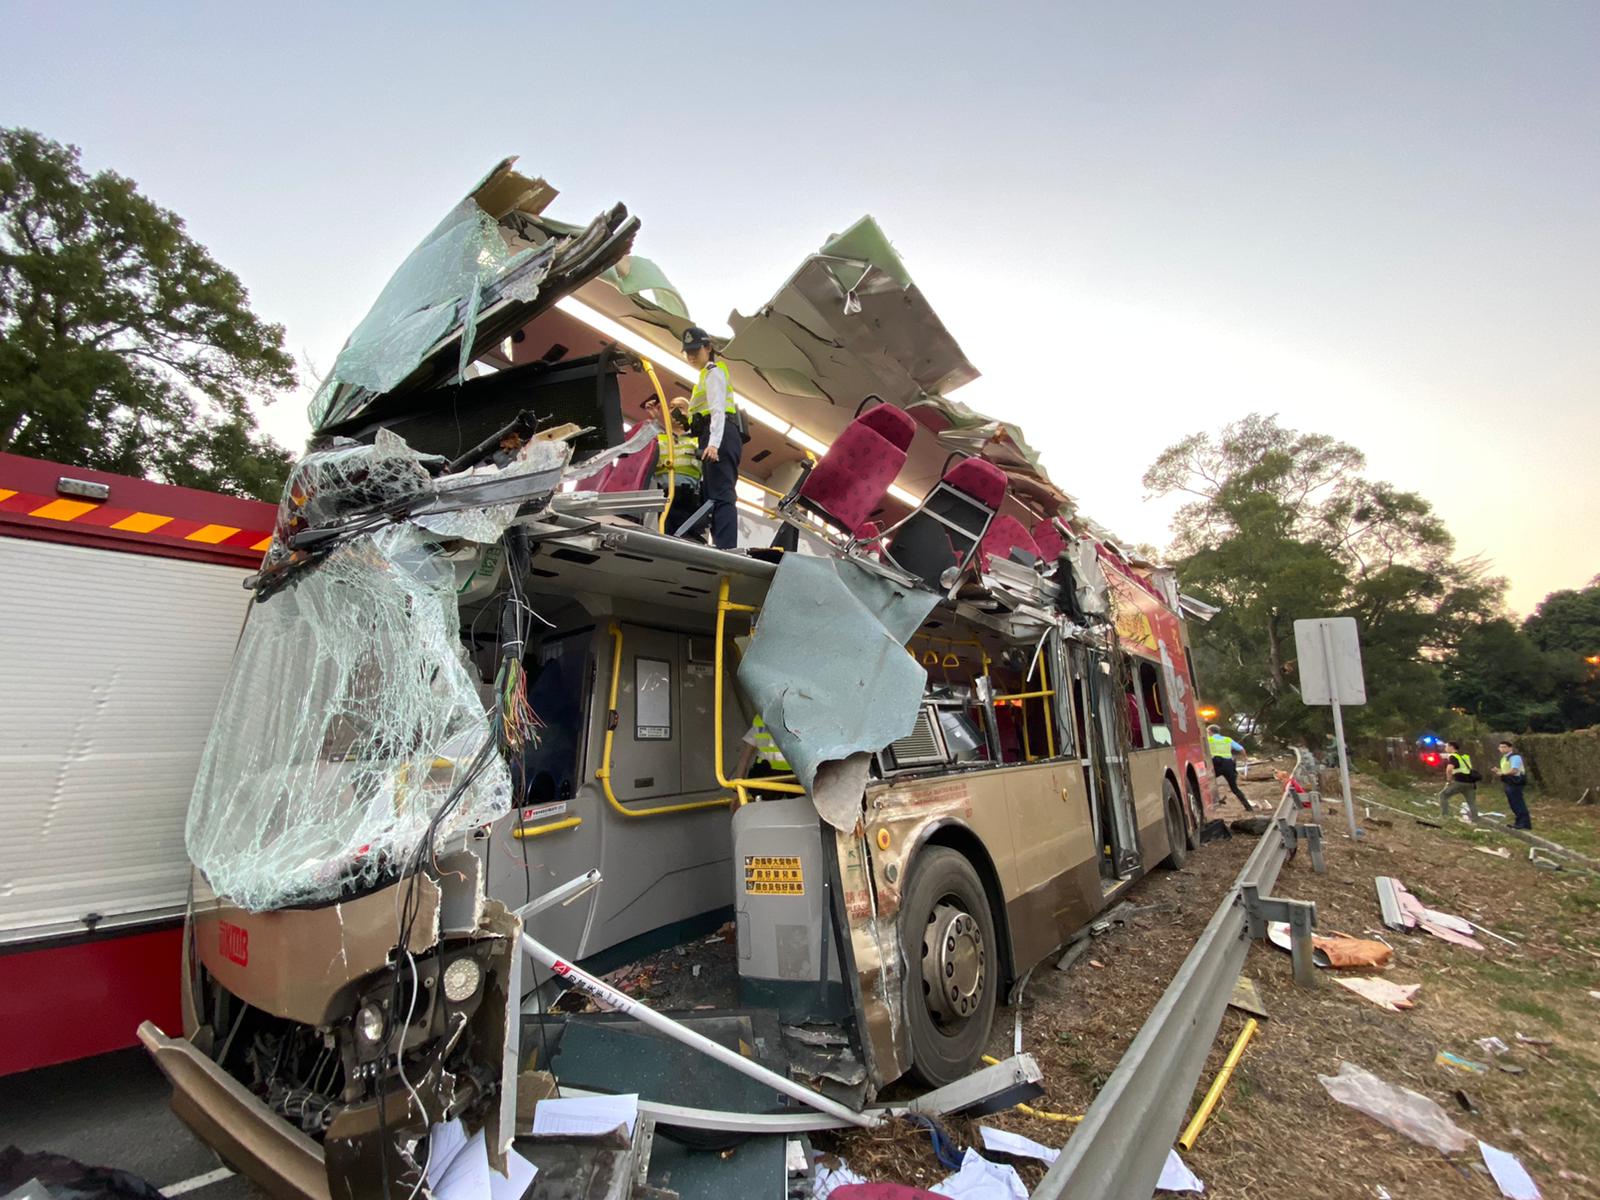 The wreckage of a KMB bus that collided with a tree this afternoon. Photo via HK Police Force.